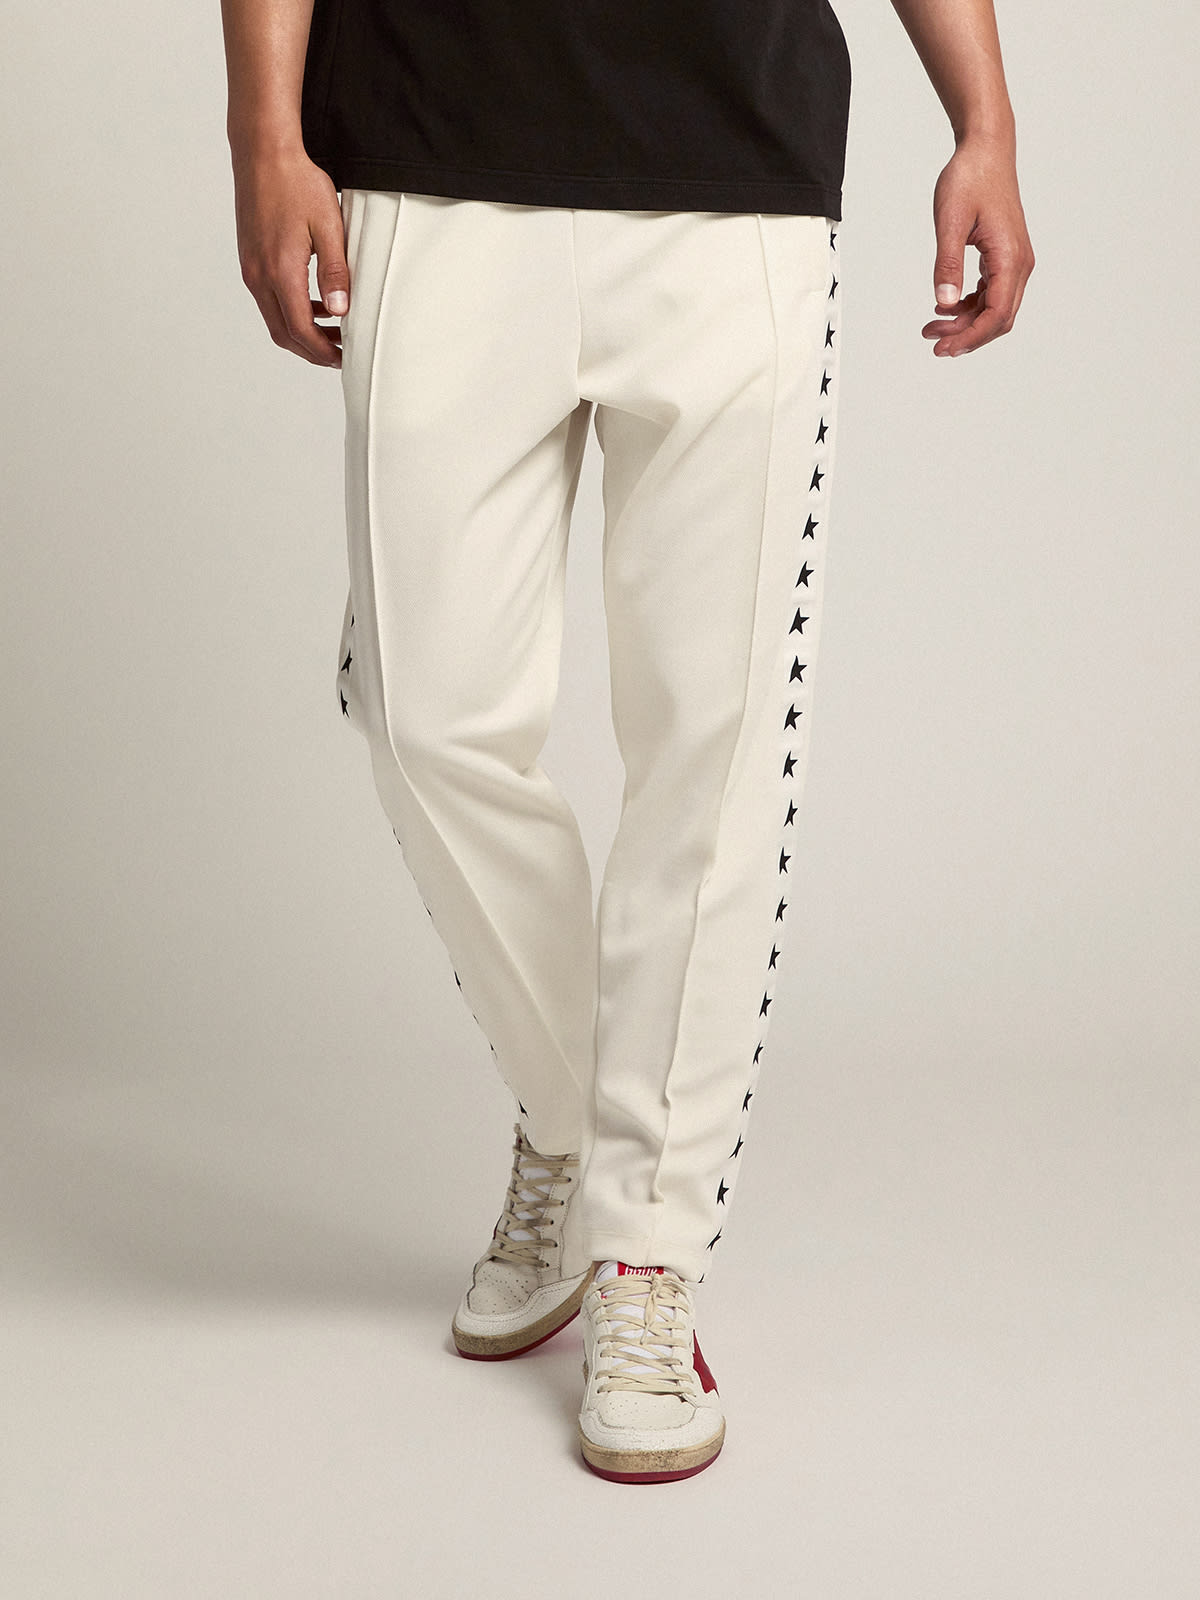 Golden Goose - White joggers with black stars on the sides in 